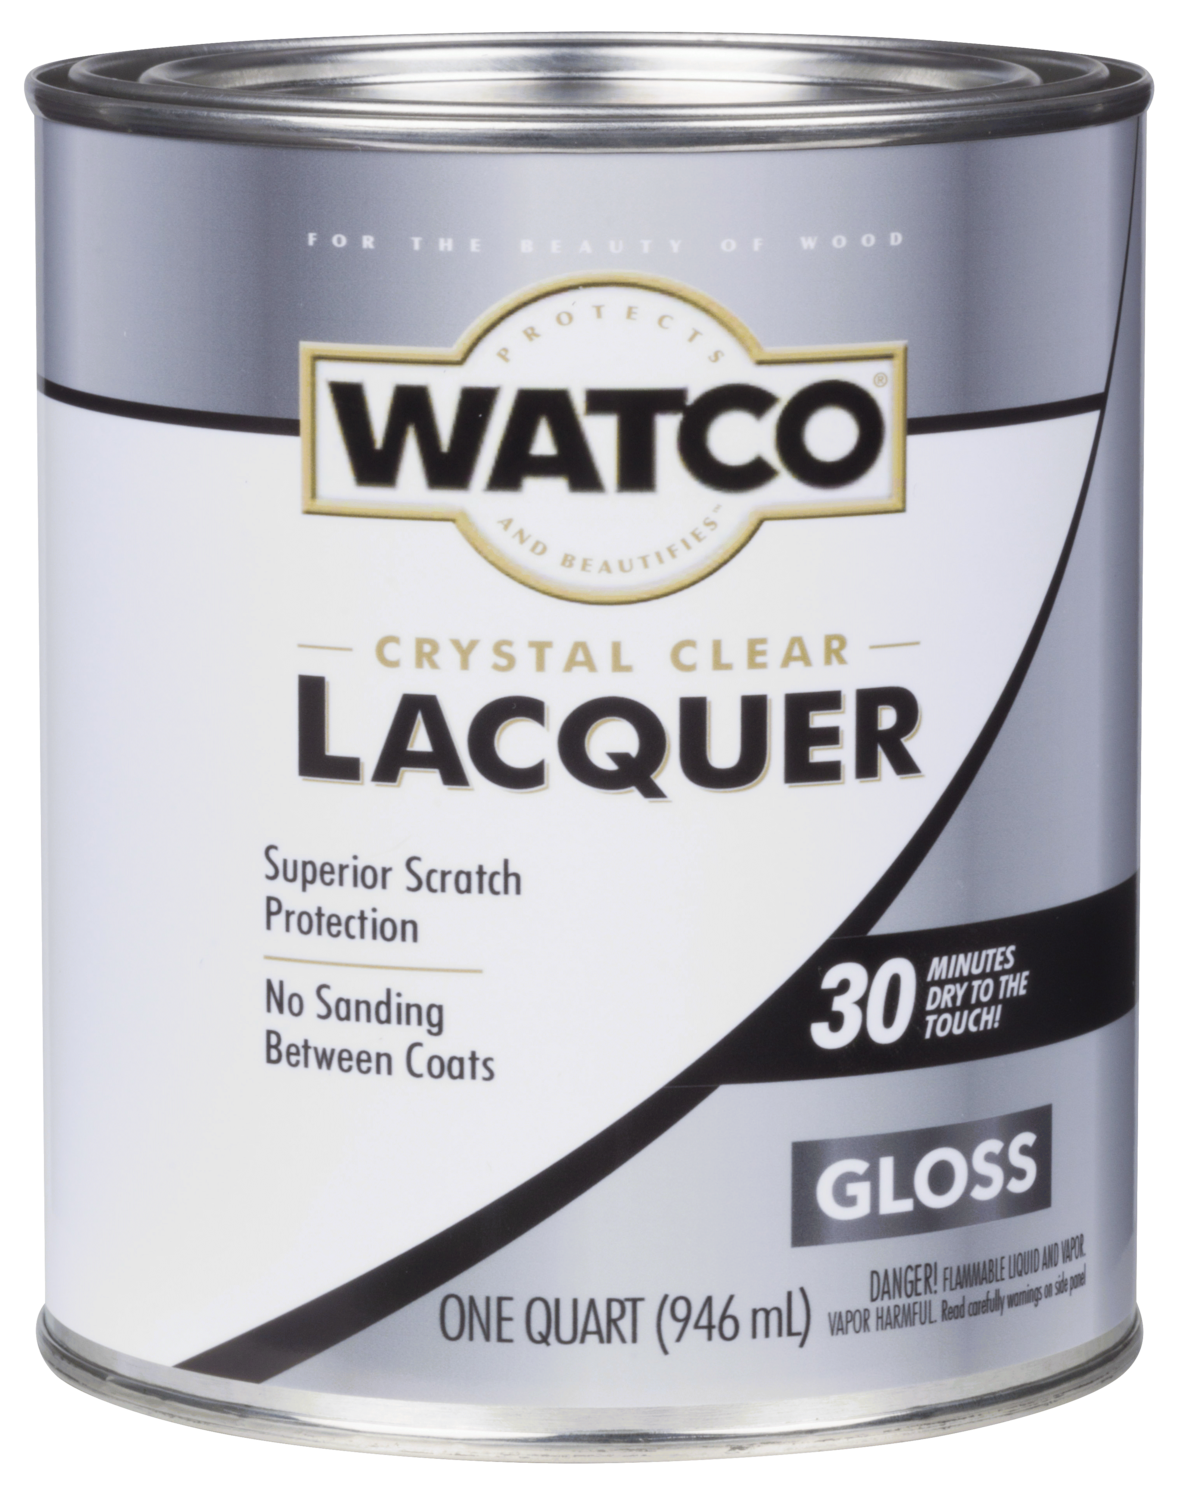 Watco Lacquer Gloss Crystal Clear